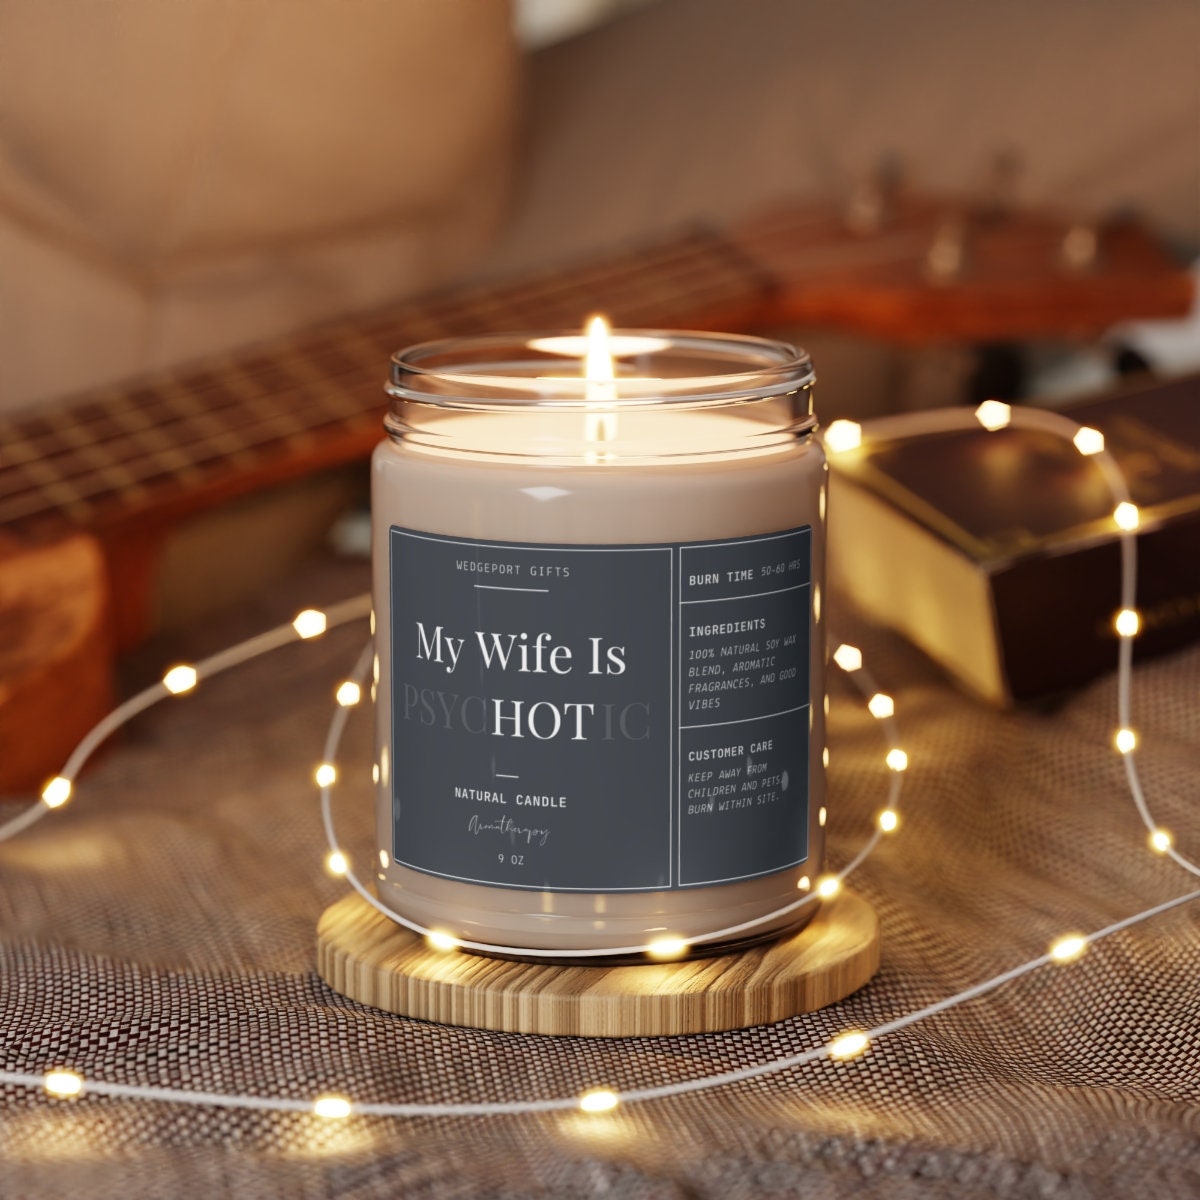 Discover My Wife is Psychotic Candle, Funny Candle Anniversary Gift for Wife, Cute Fall candles Gifts for her, Funny Gift for Wife, Birthday Gifts